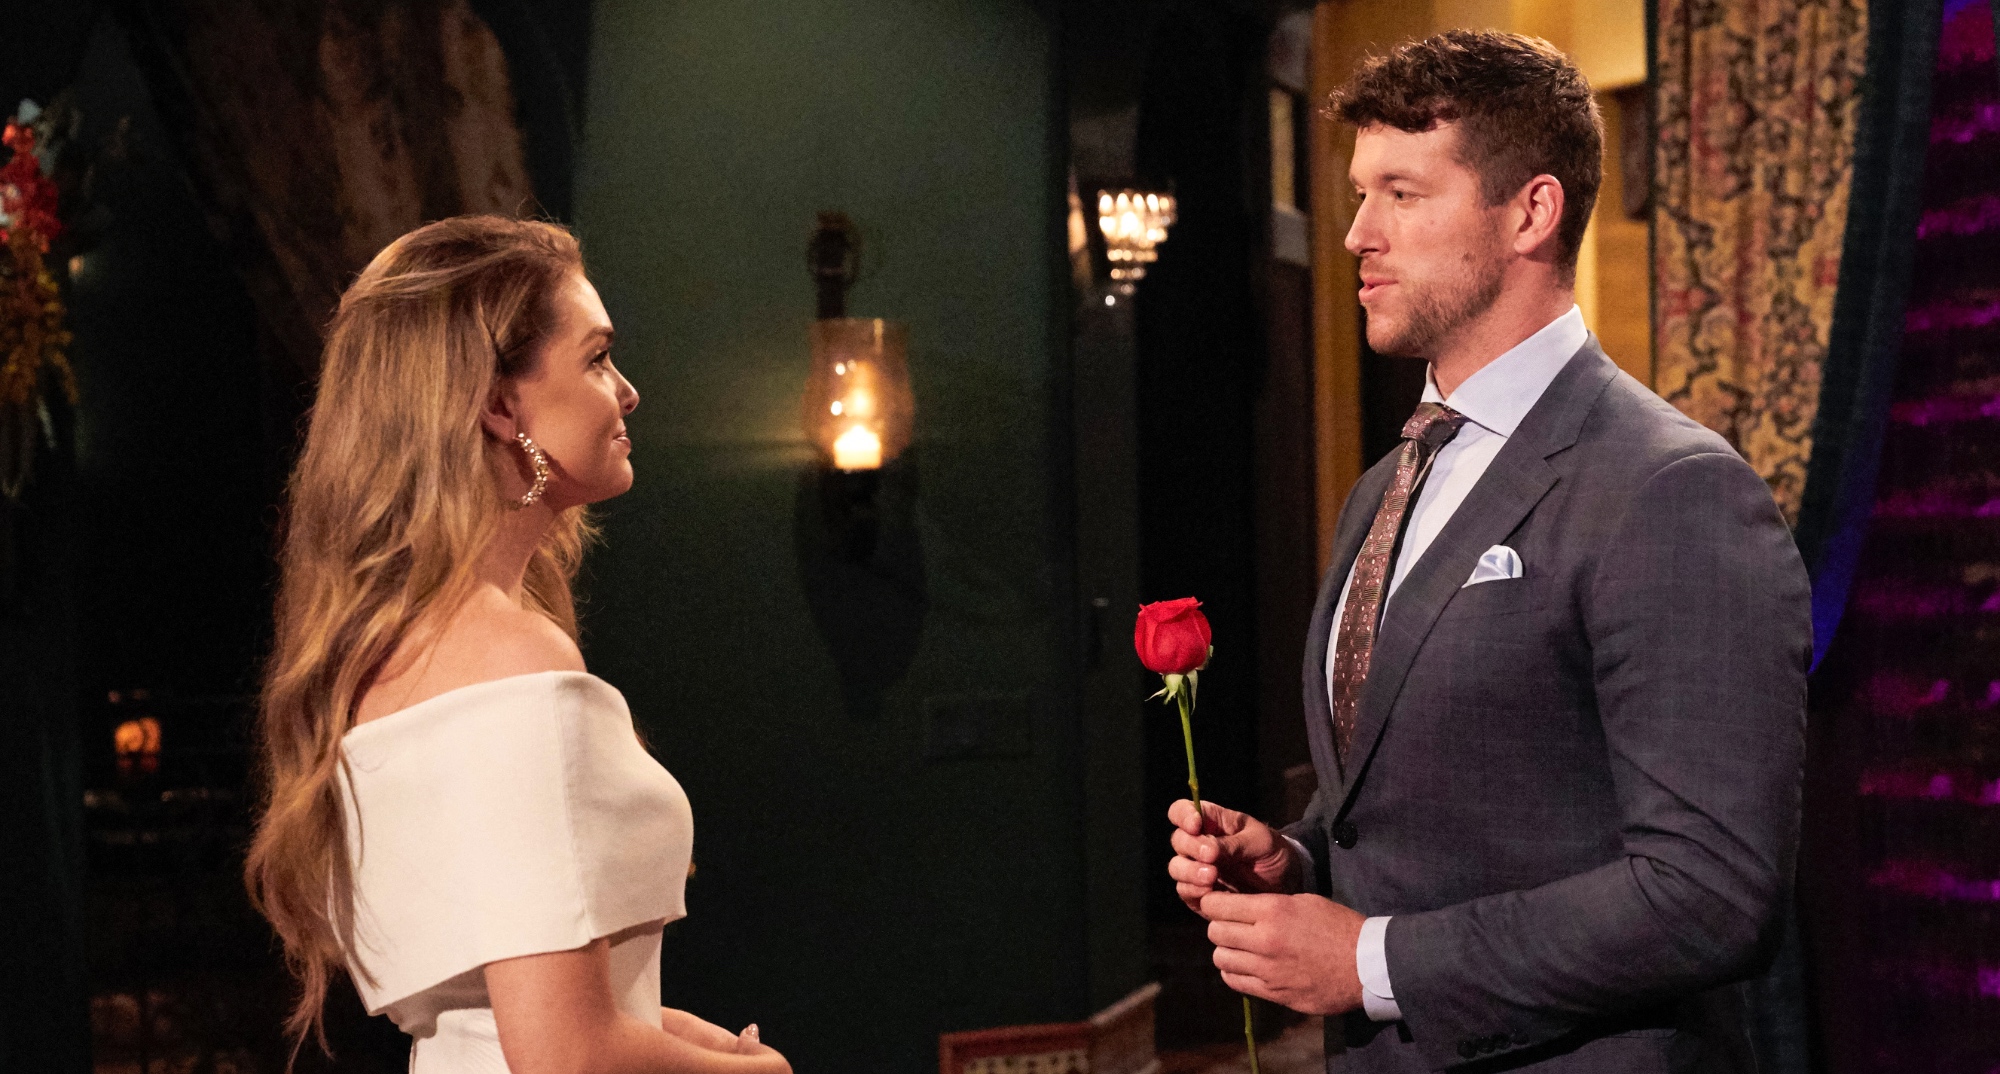 Clayton Echard and Susie Evans on 'The Bachelor' during rose ceremony.